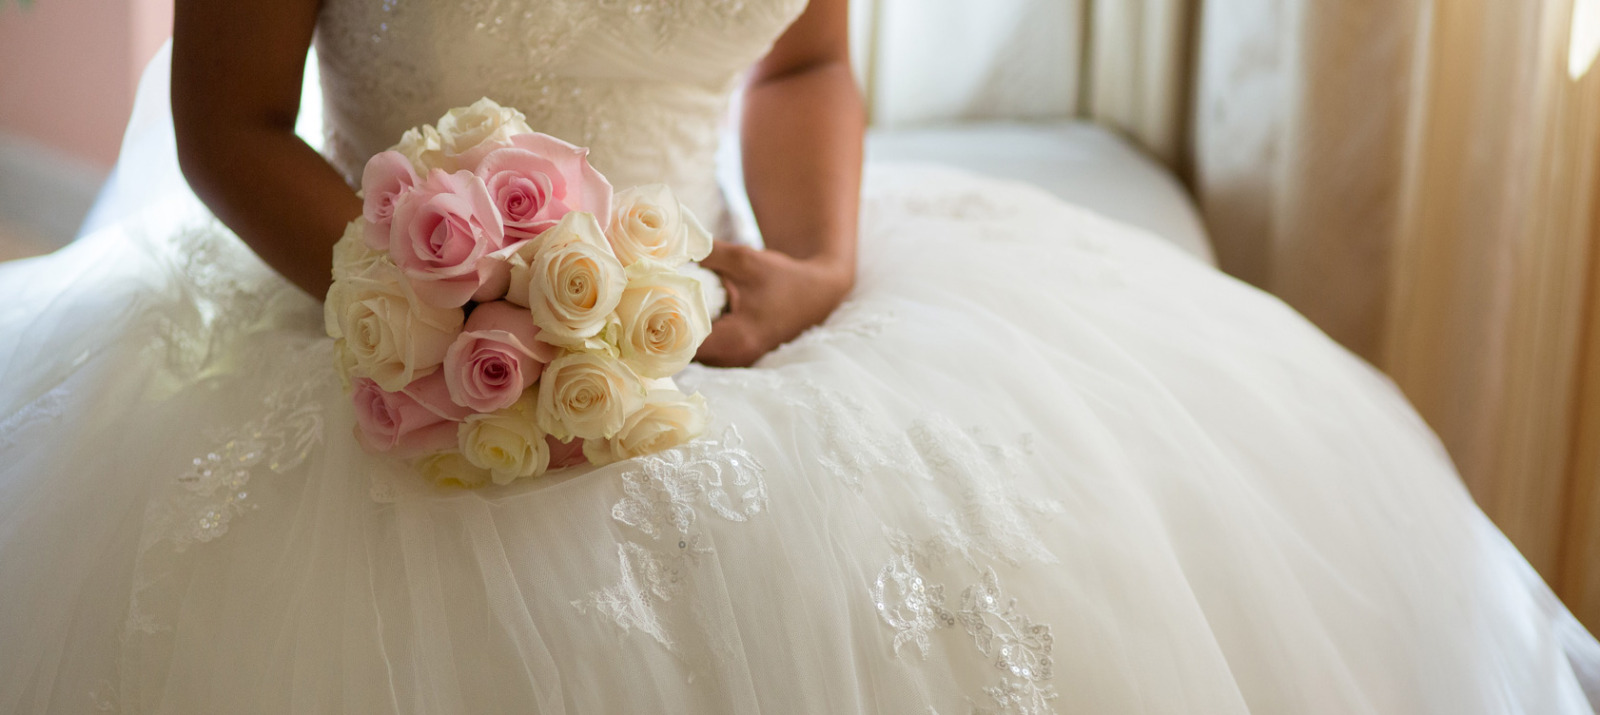 Image of wedding dress dry cleaning